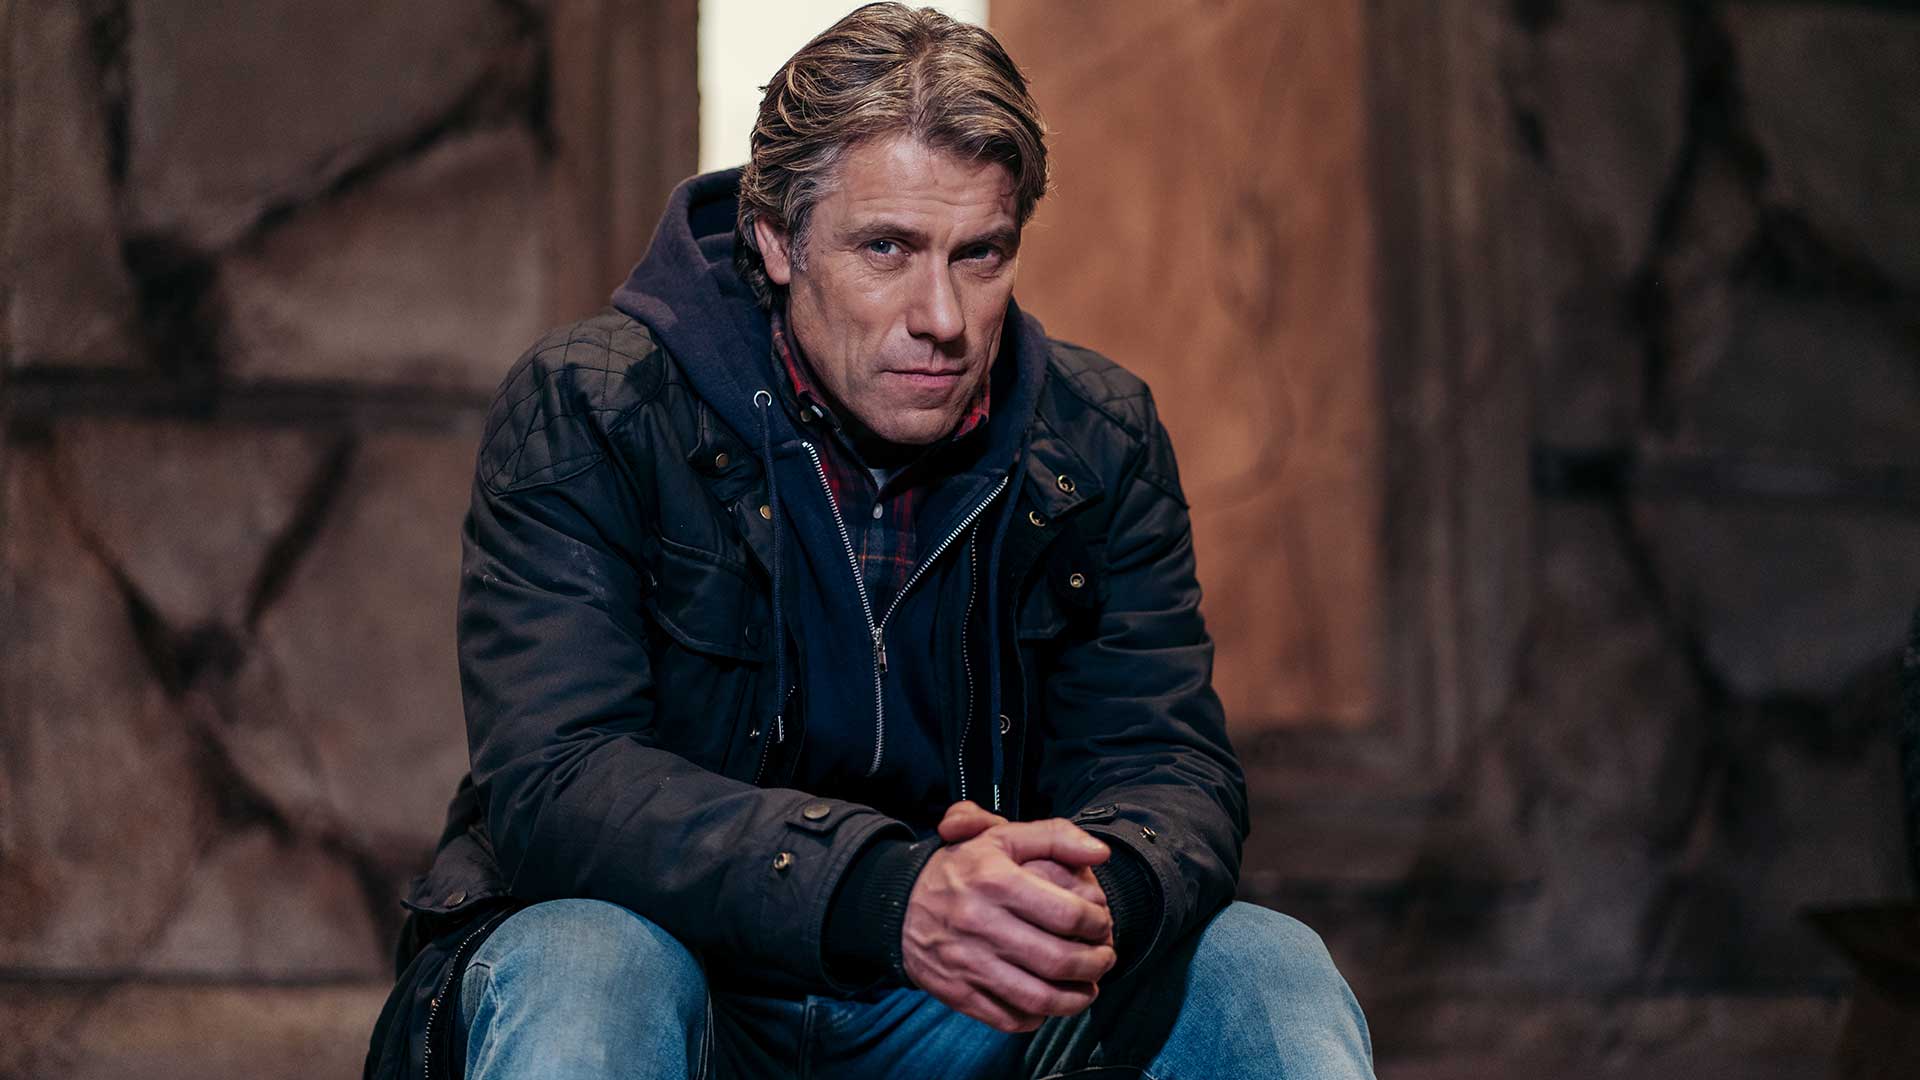 Comedian and Actor John Bishop Joins Next Season of 'Doctor Who'